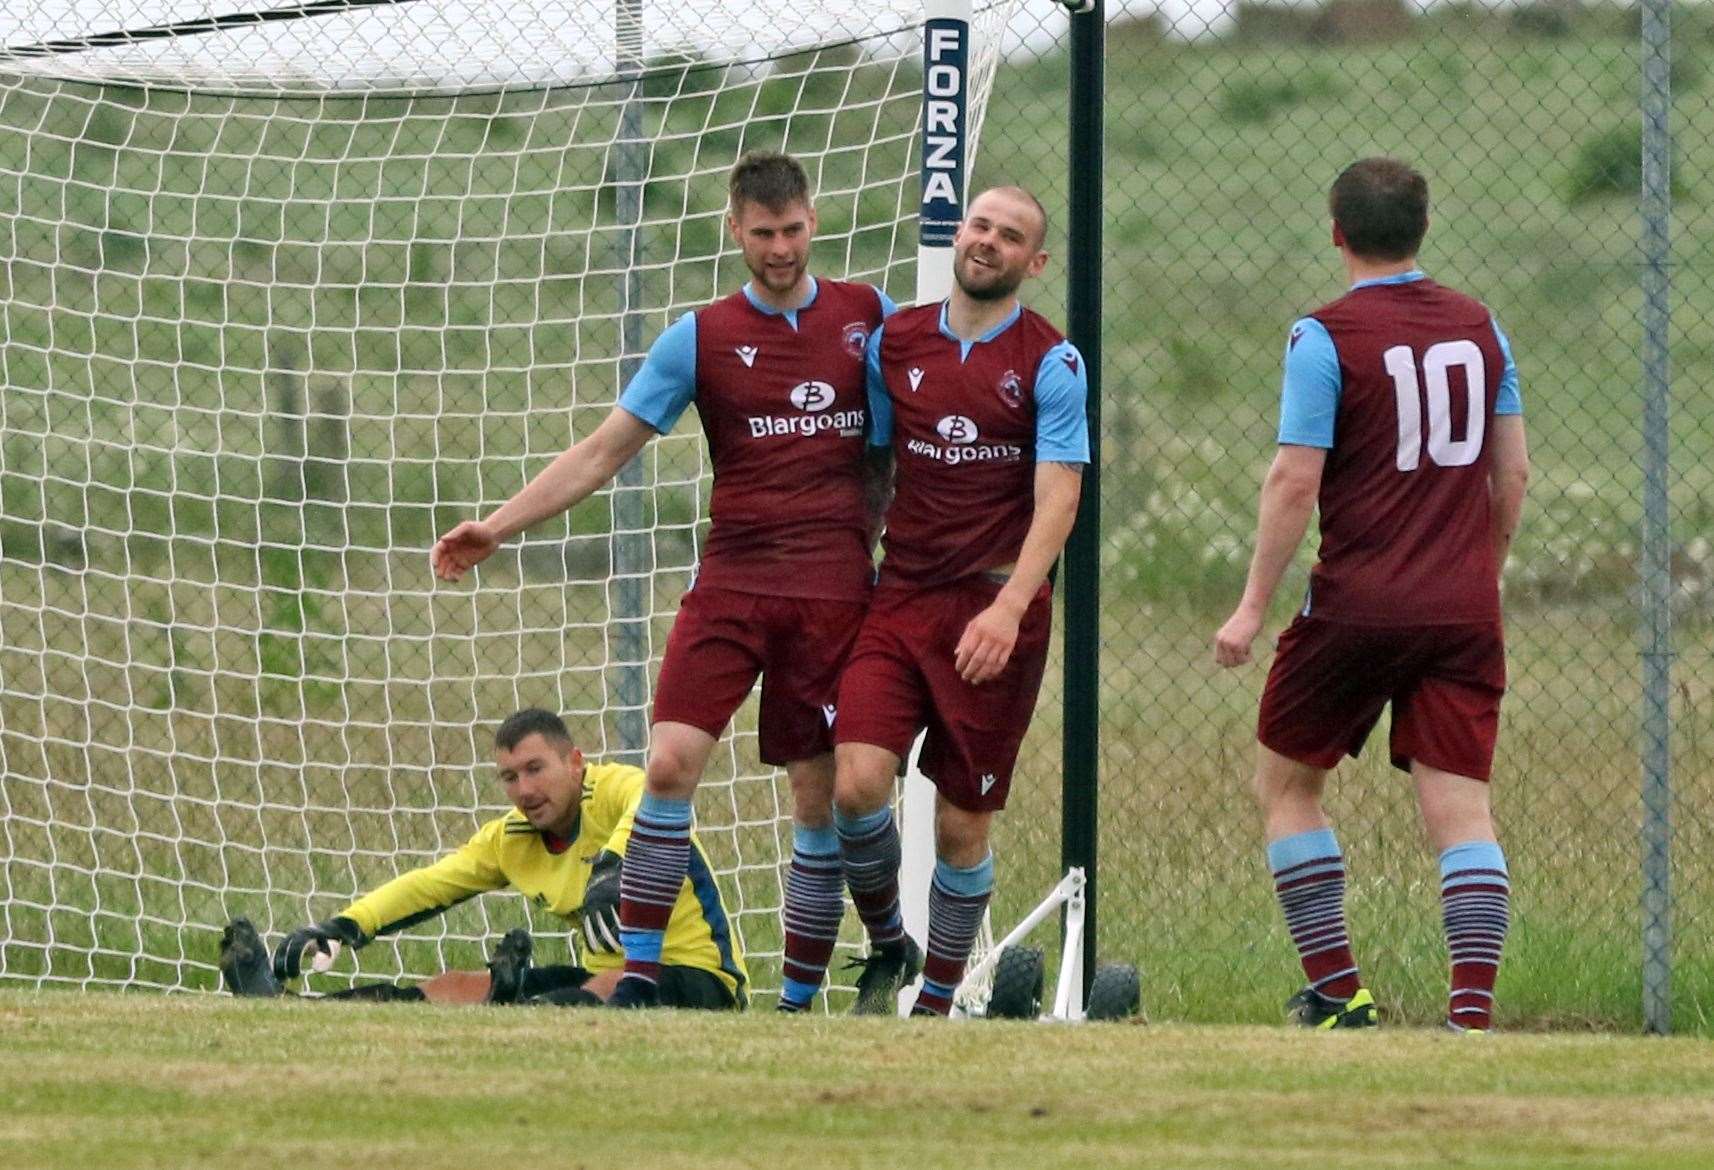 Sean Munro (centre) is congratulated on scoring Pentland United's second goal by Marc Macgregor and No 10 Andy Mackay. Picture: James Gunn